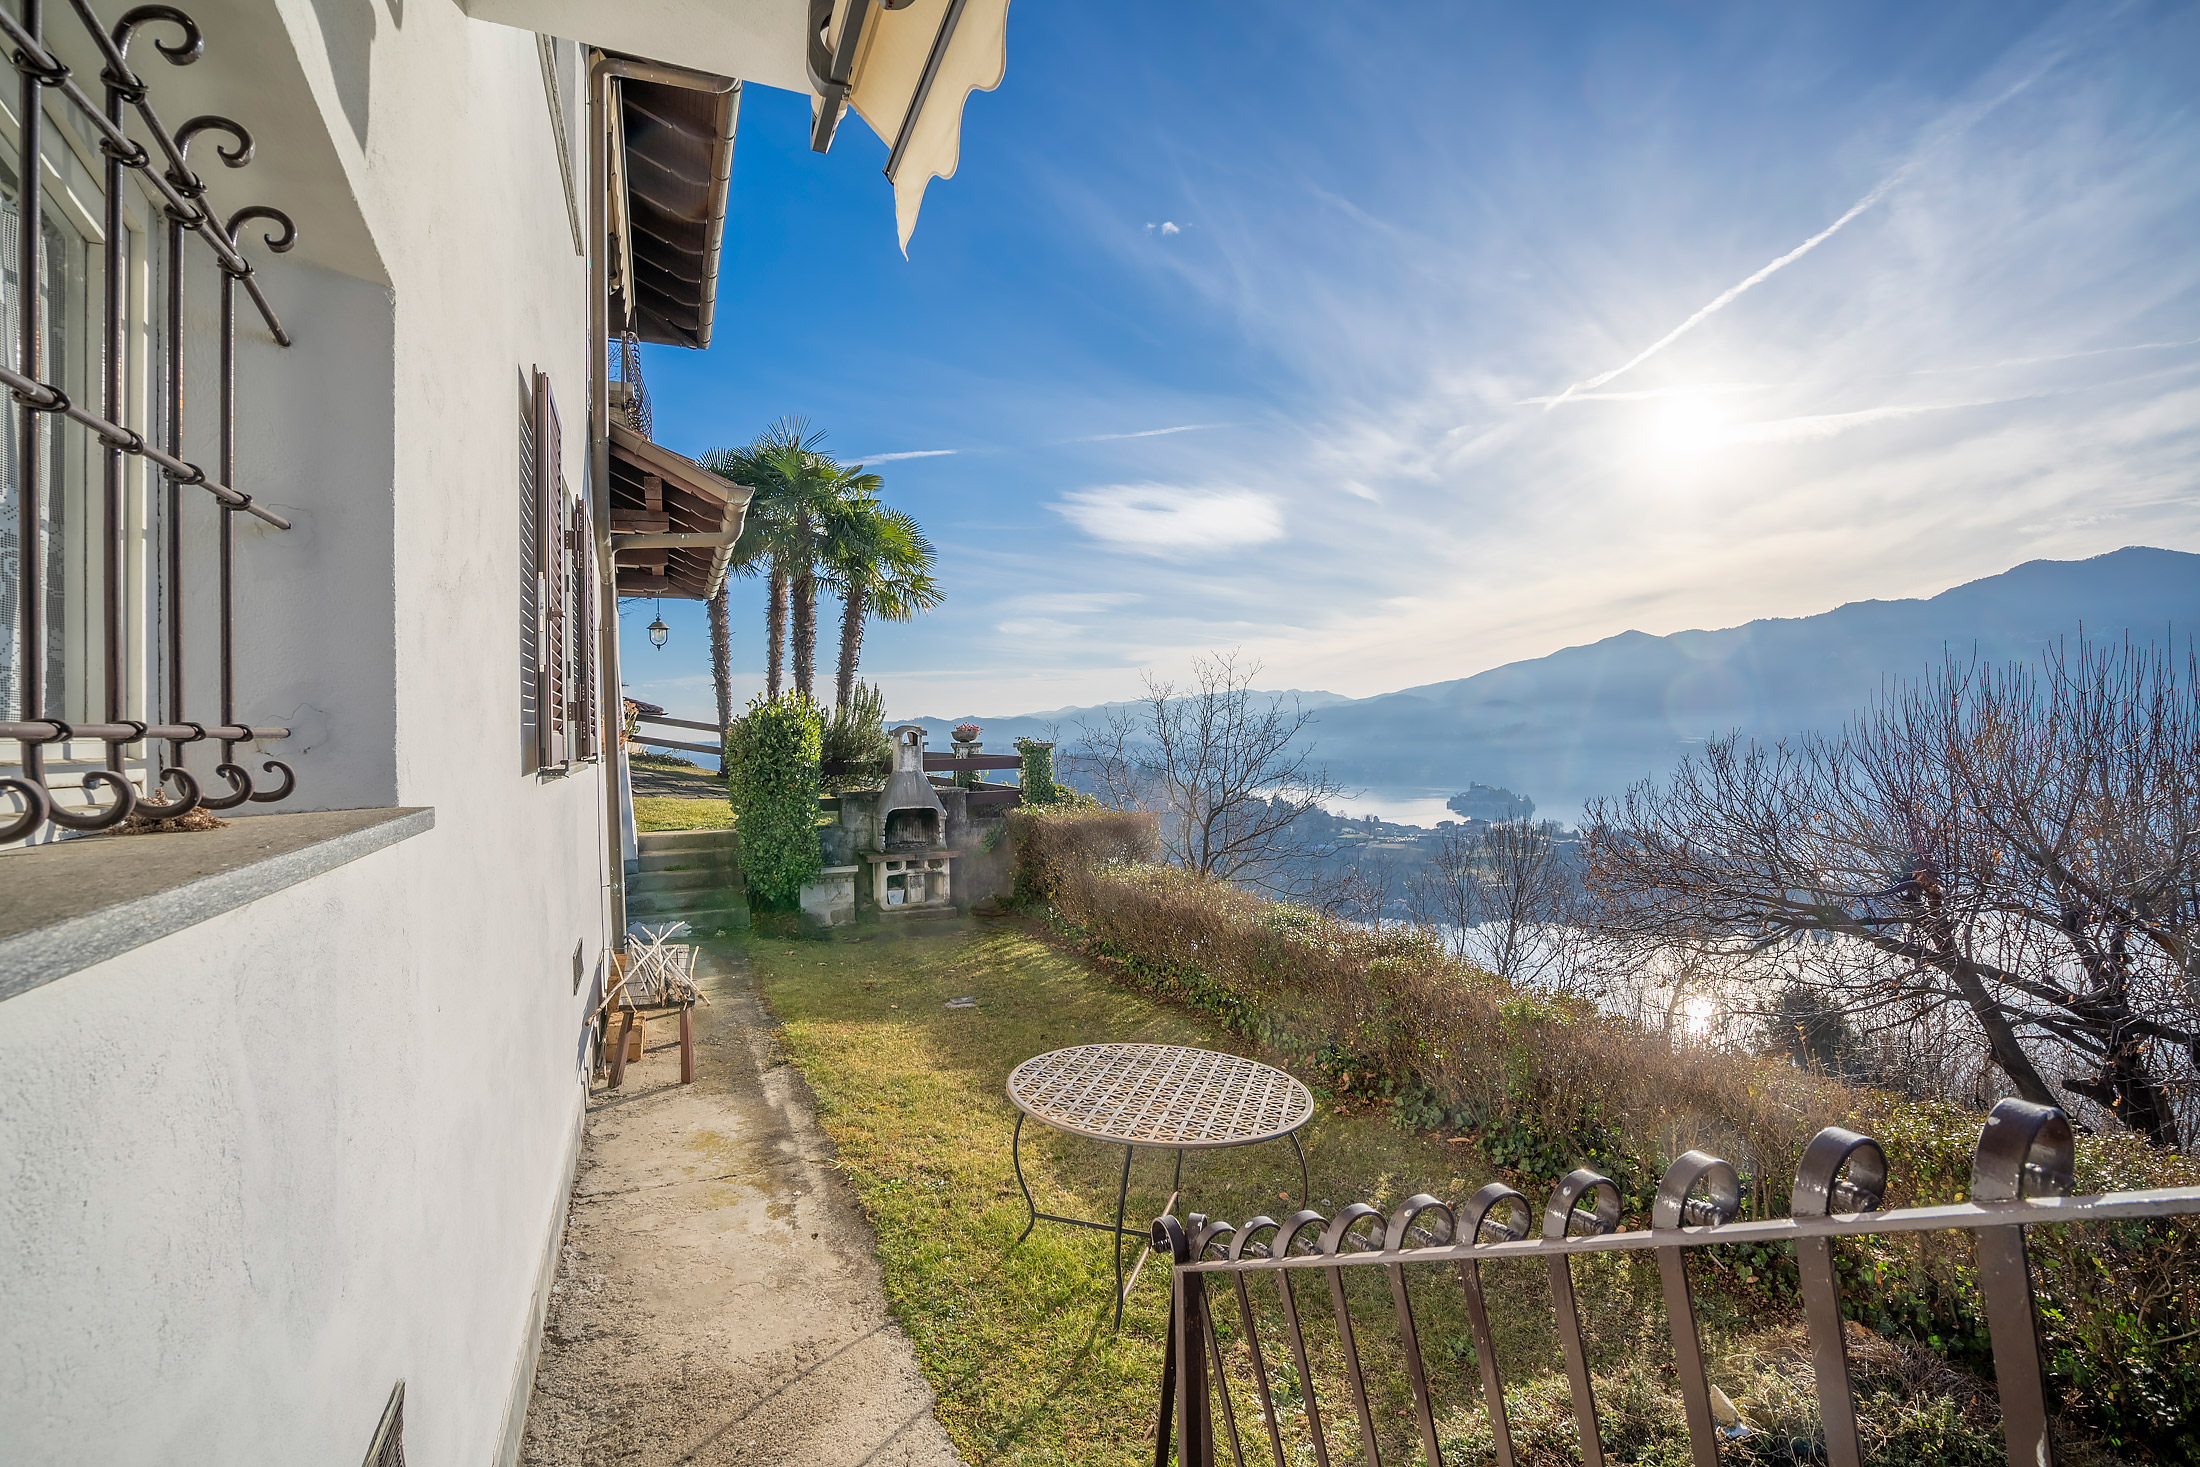 MIASINO Detached villa with garden and breathtaking view over Lake Orta